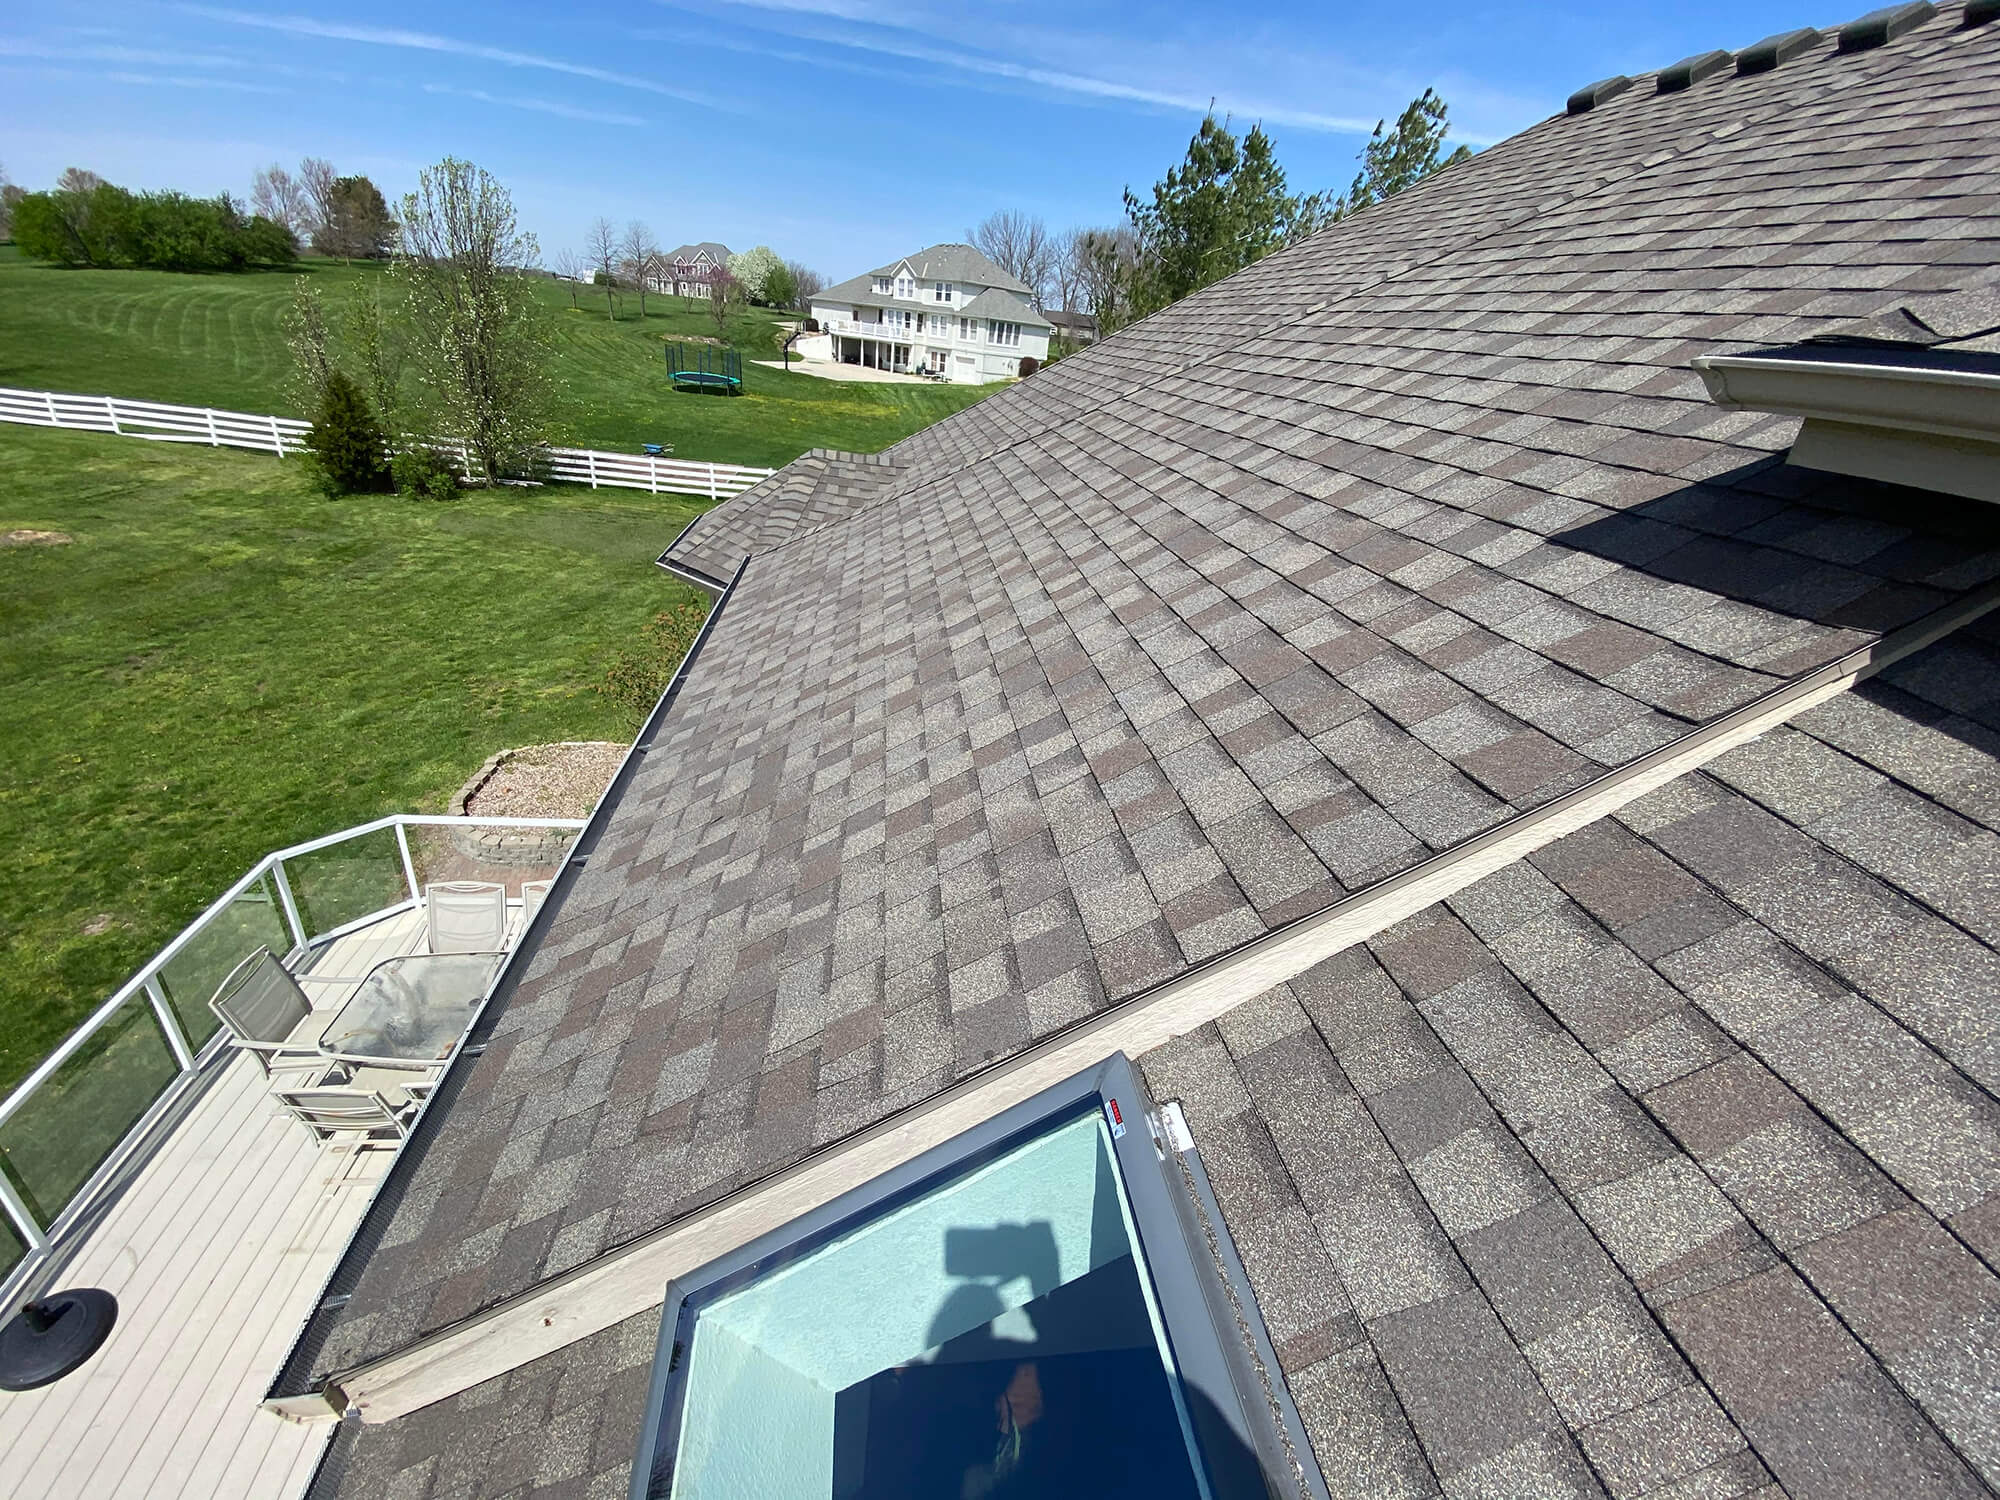 Rooftops: When Should I Replace My Roof